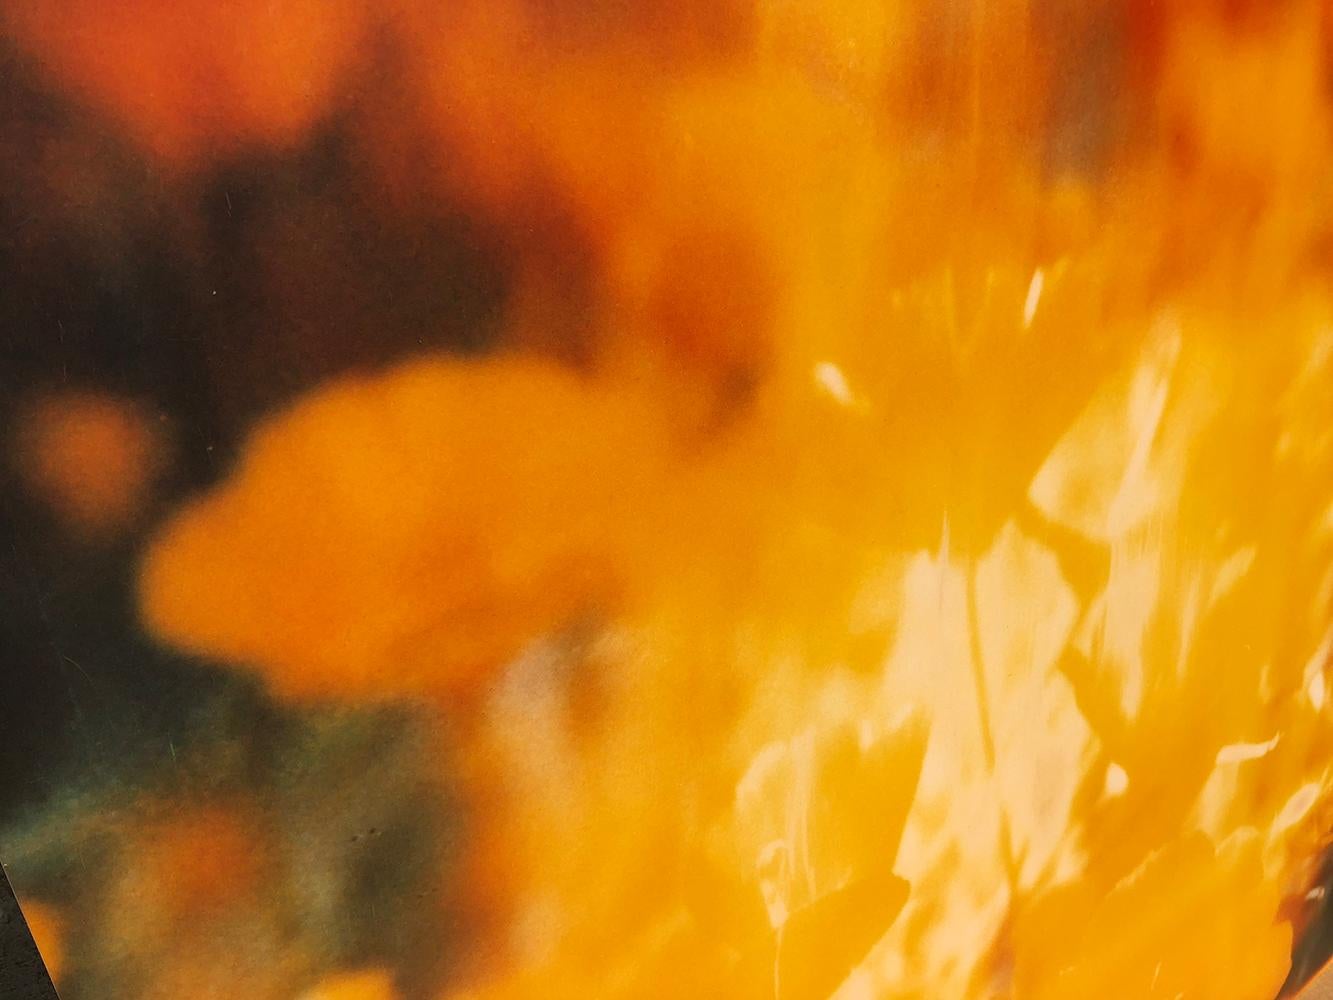 Yellow Flower (The Last Picture Show) - 2005,

128x125cm, Edition 5/5, 
analog C-Print, hand-printed by the artist on Fuji Crystal Archive Paper, 
based on a Polaroid, 
Certificate and signature label, 
Artist Inventory 672.05, 
Not mounted